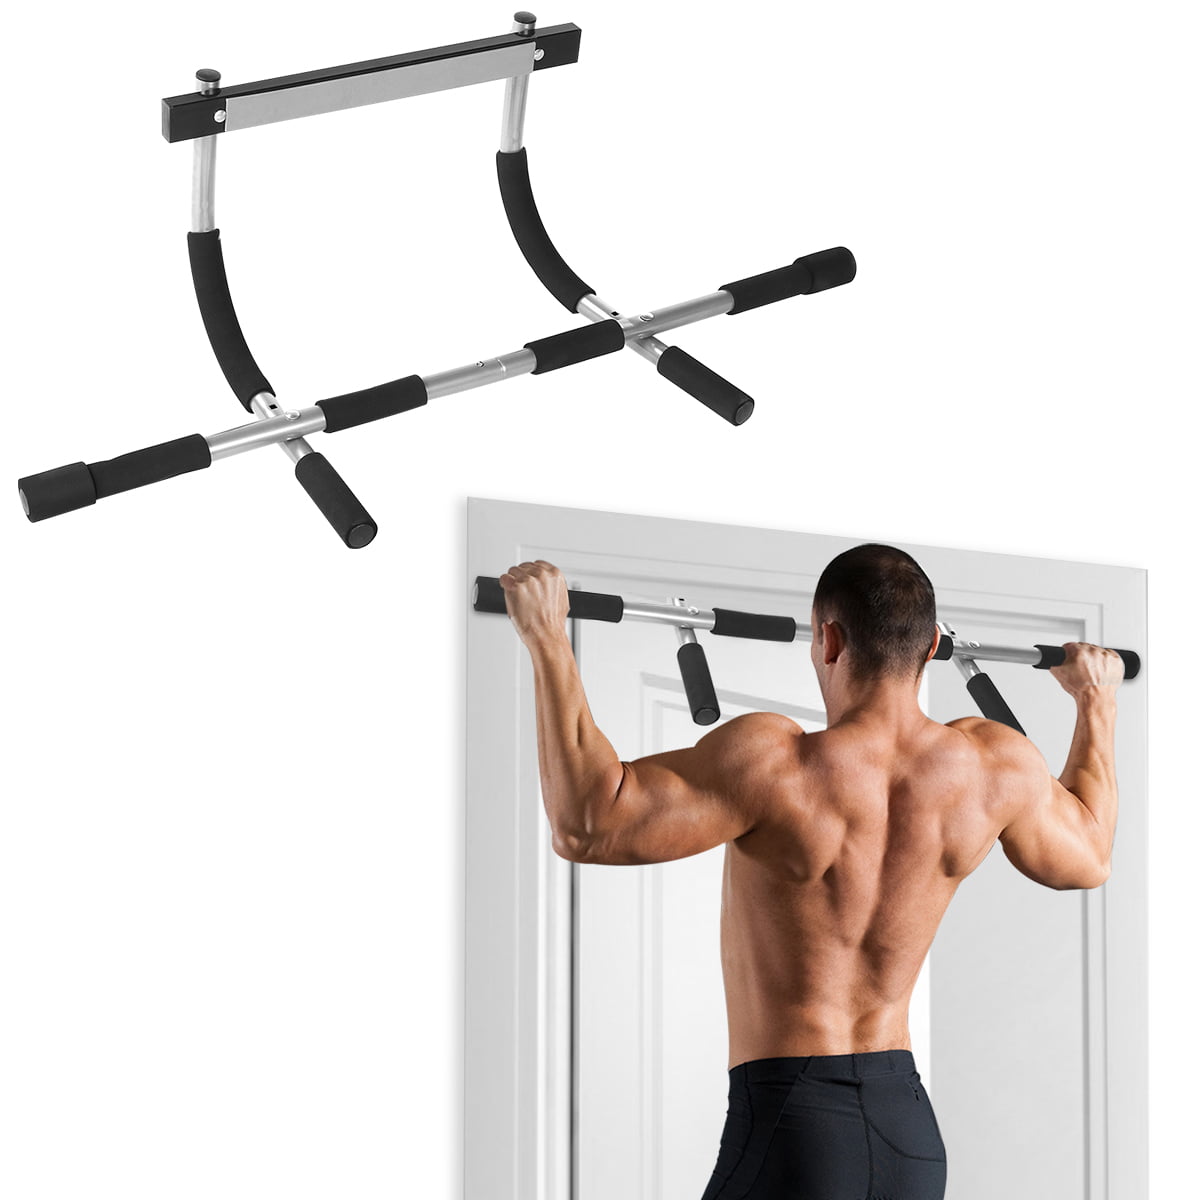 Portable Door Pull Up Bars Exercise Strength Fitness Gym Chin Up Workout Bar US 